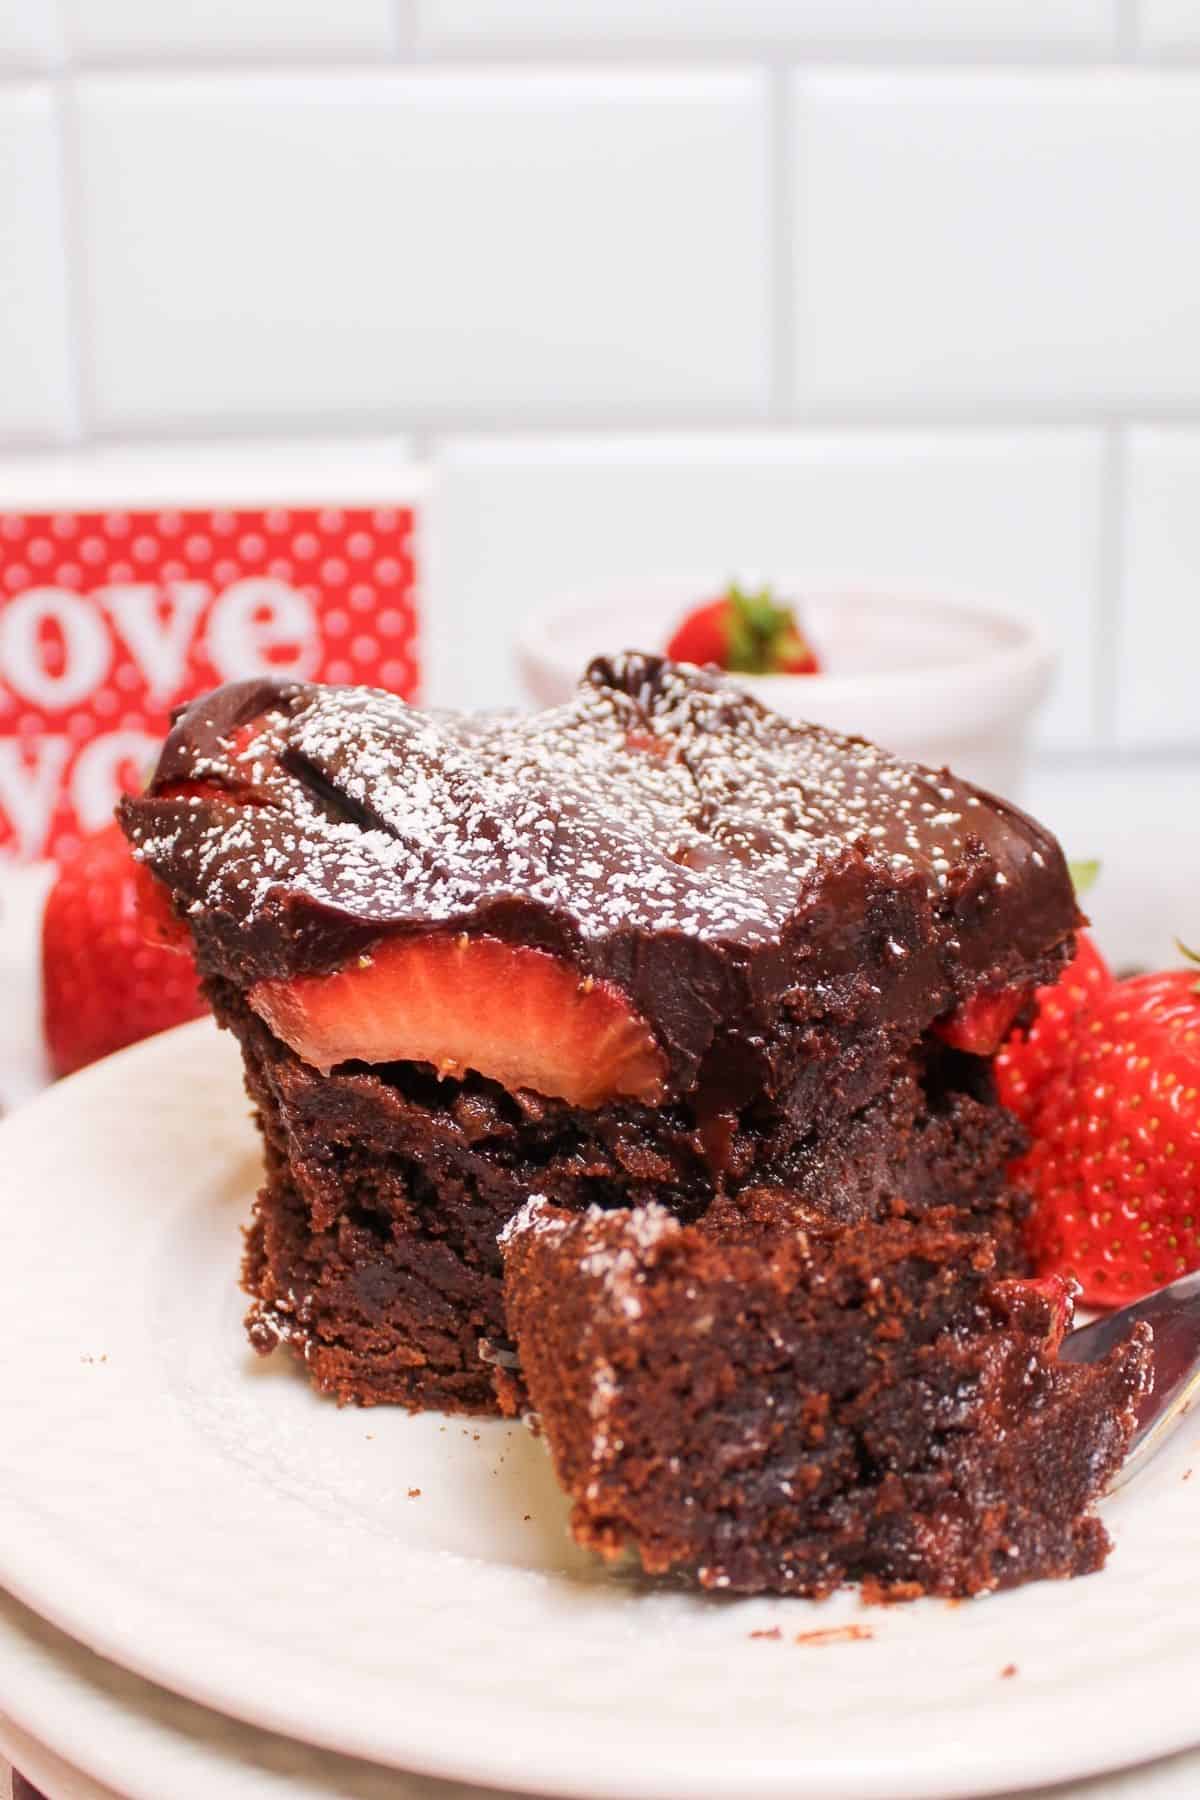 inside of a slice pf the brownies with strawberries